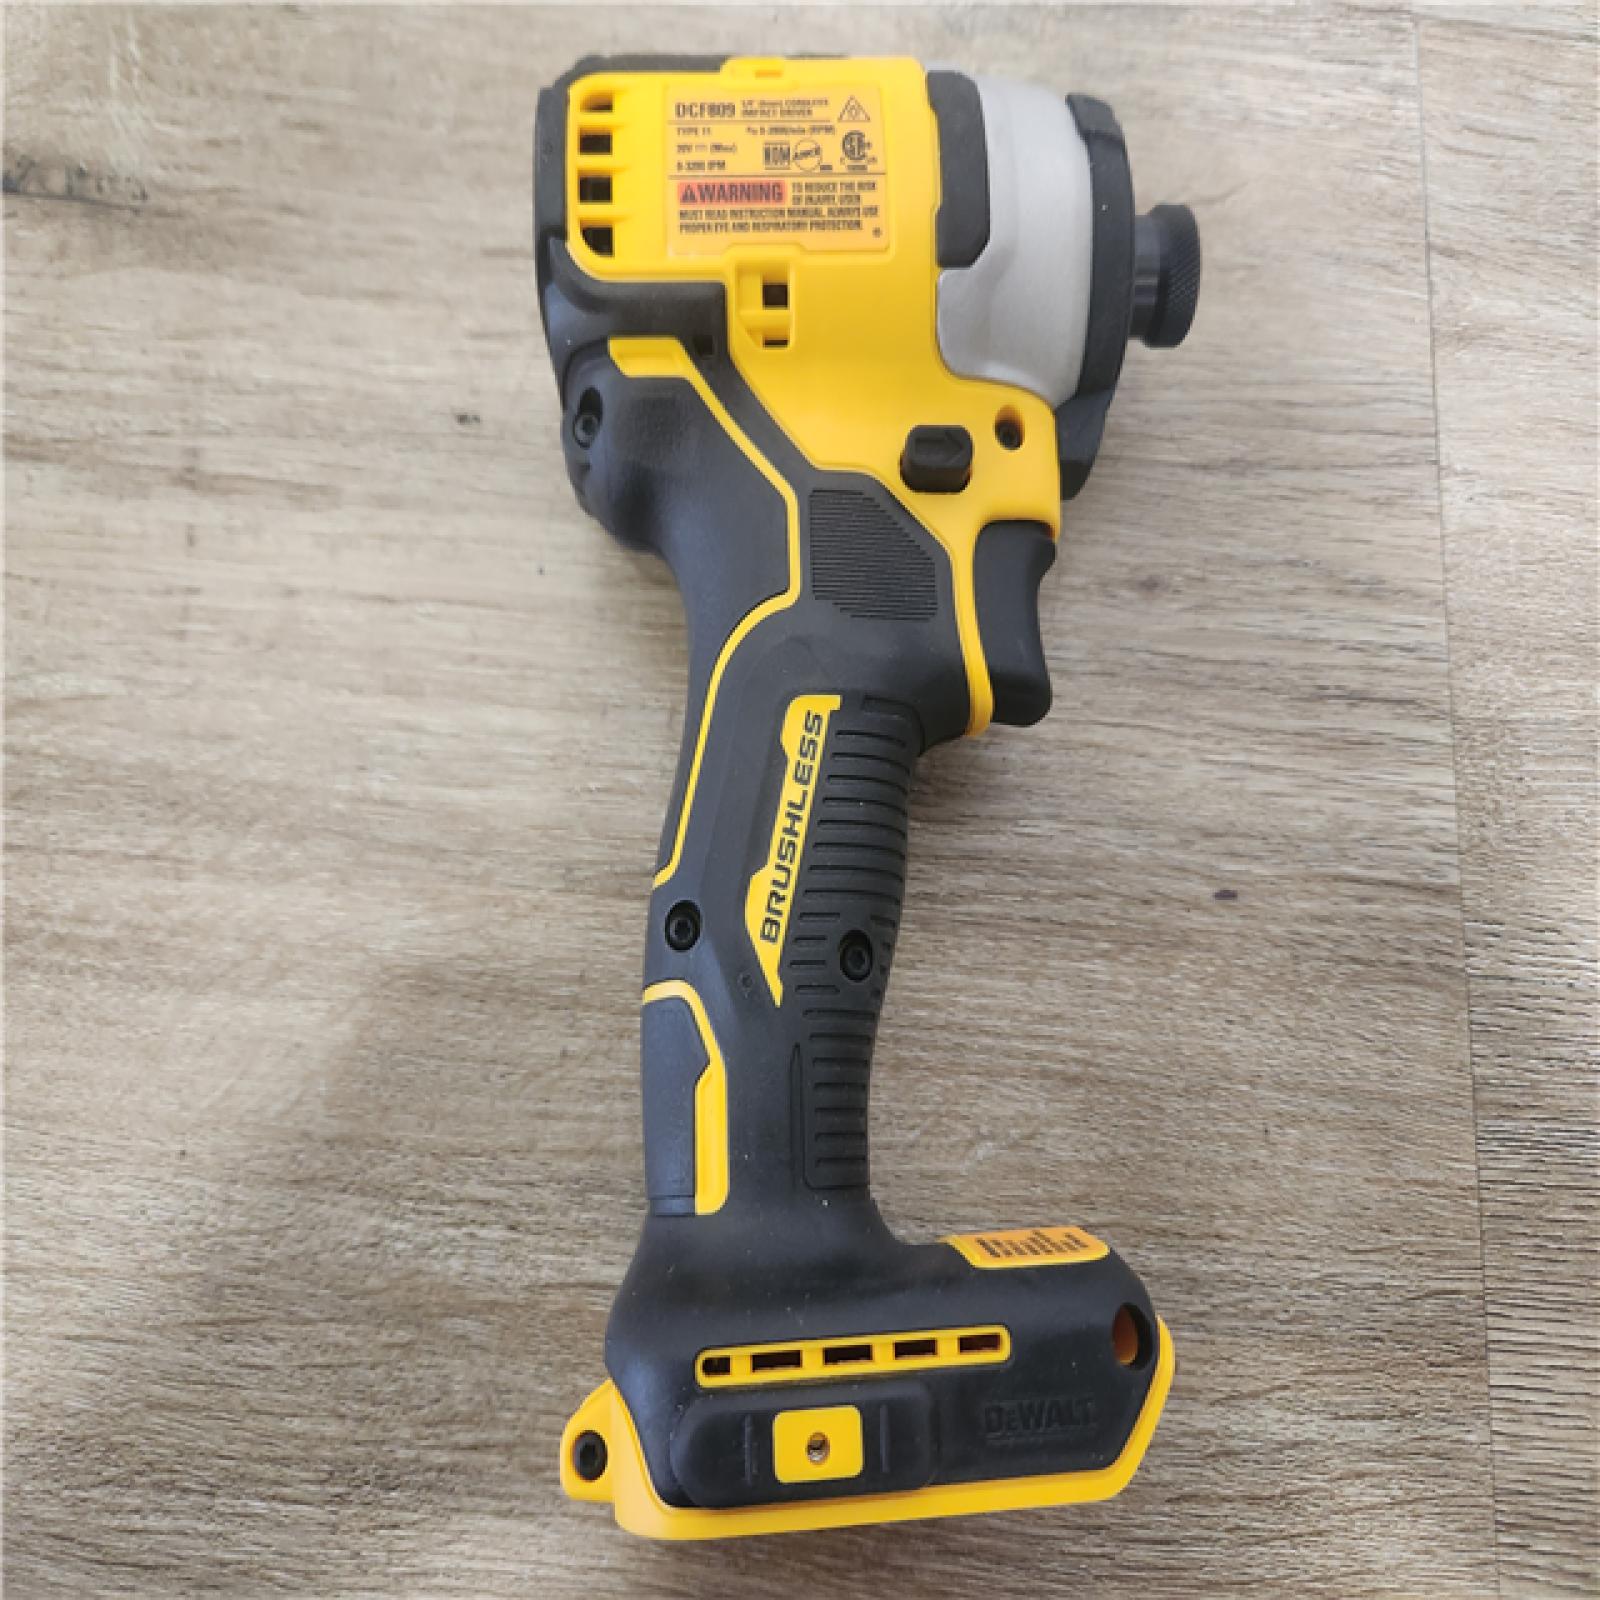 Phoenix Location NEW DEWALT ATOMIC 20V MAX Cordless Brushless 3 Tool Combo Kit, (2) 2.0Ah Batteries, Charger, and Bag